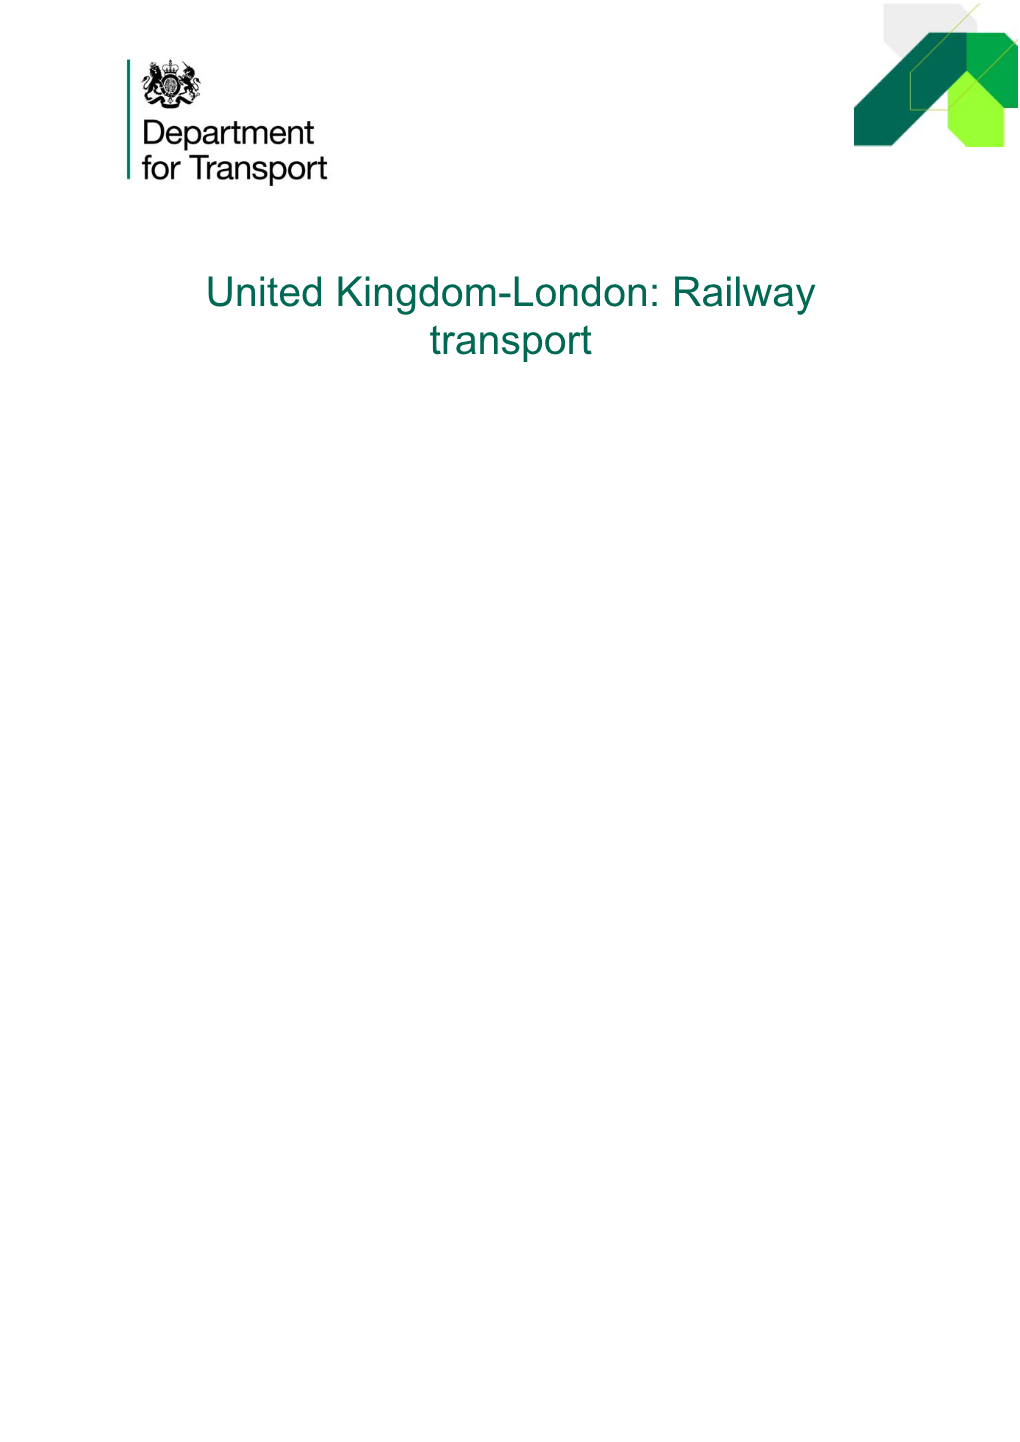 United Kingdom-London: Railway Transport Prior Information Notice for a Public Service Contract